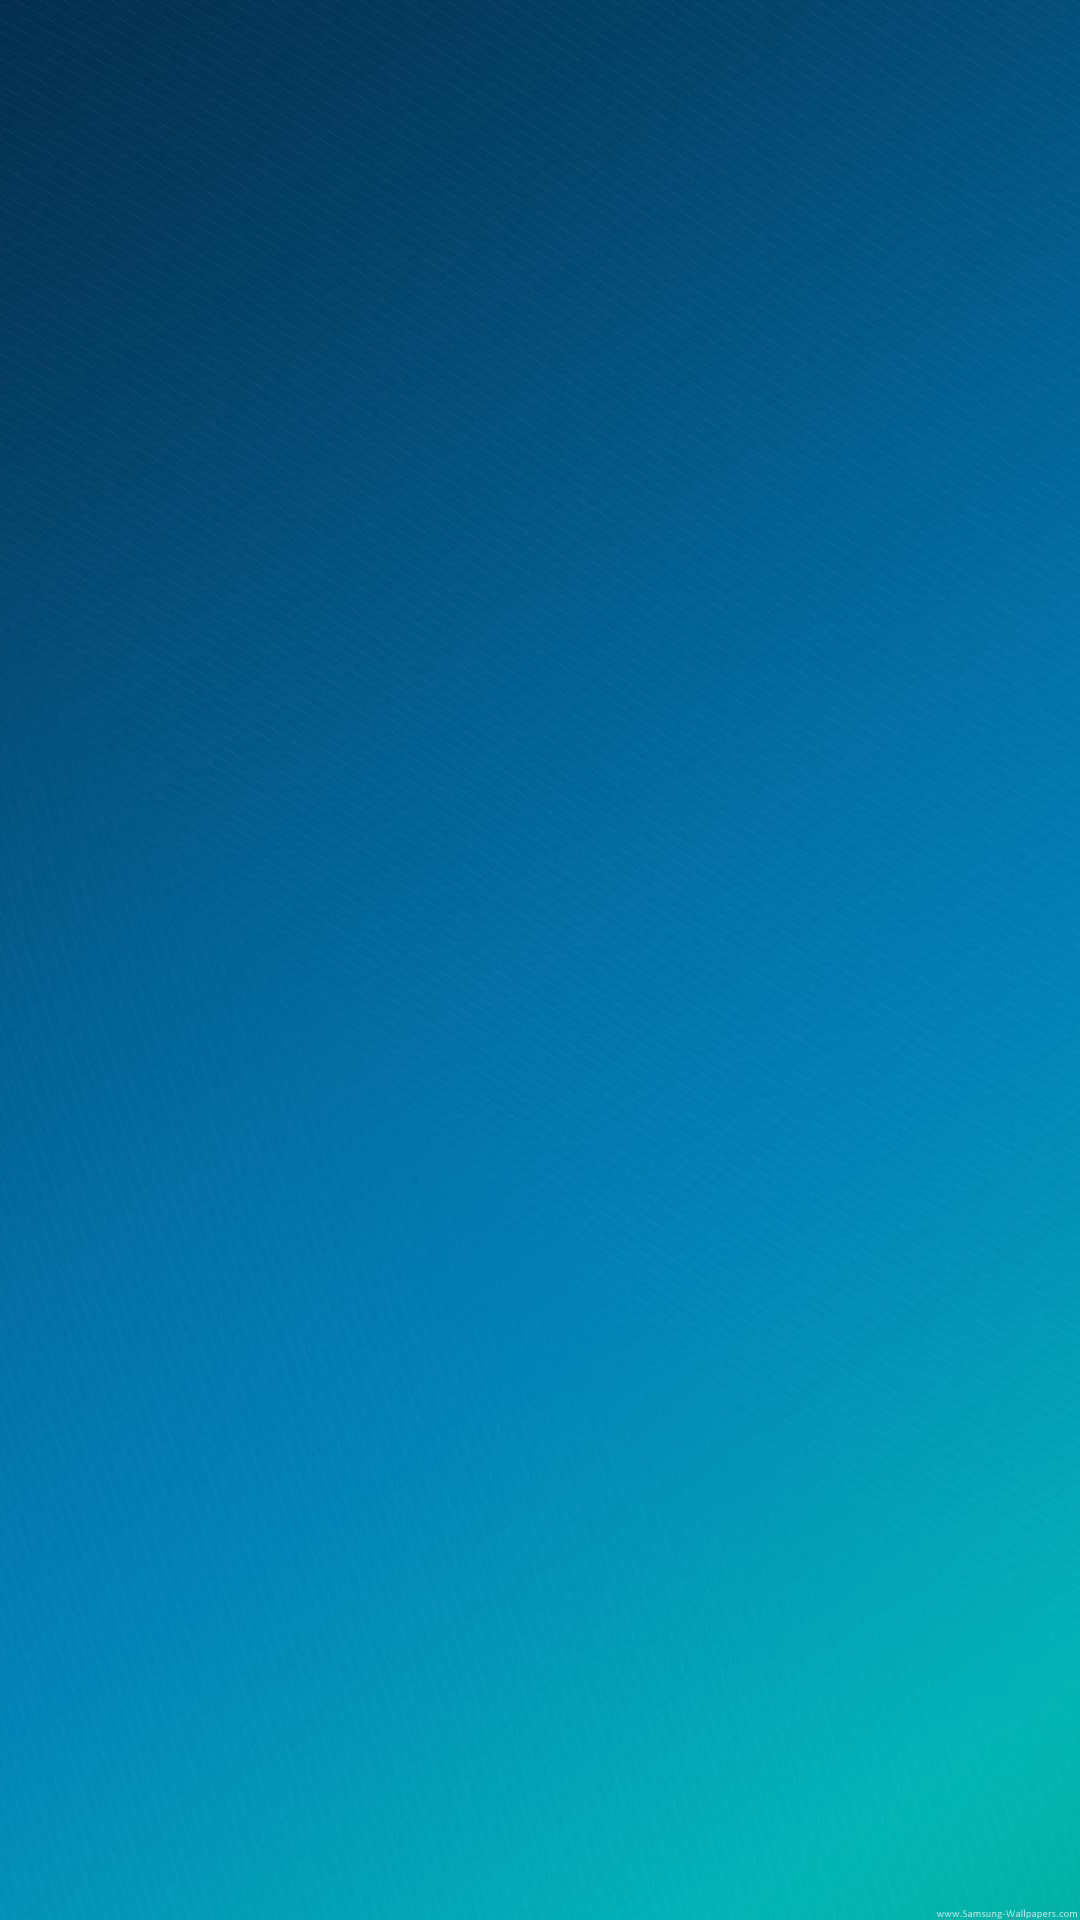 galaxy note 4 stock wallpapers